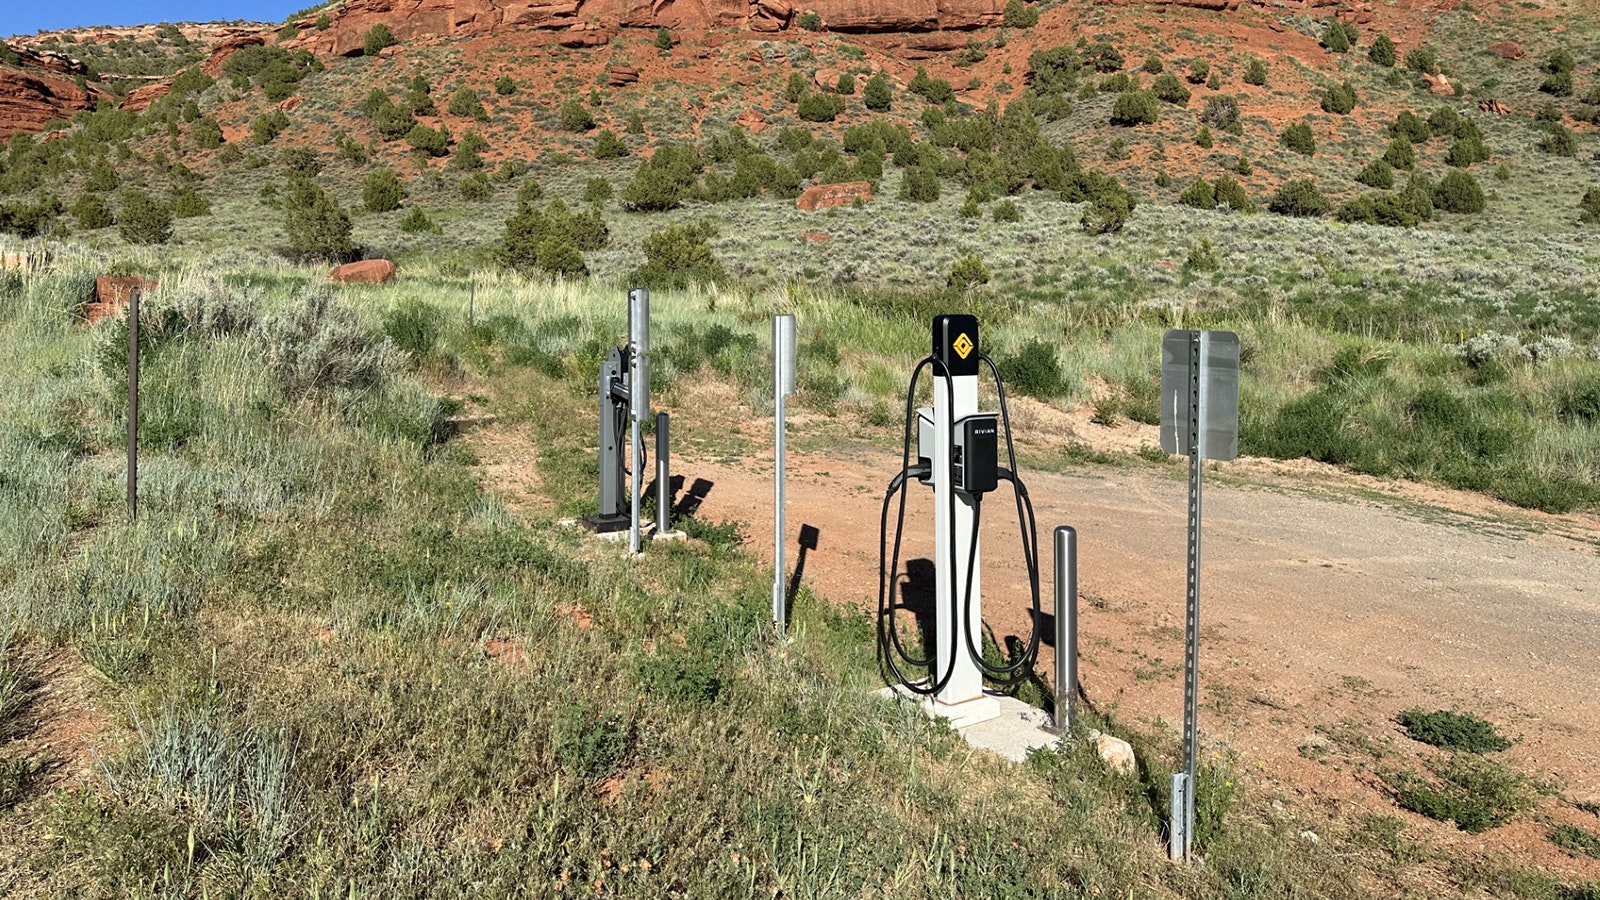 This solar-powered EV charging station on the 5,000-acre Red Canyon Ranch in the middle of nowhere near Lander, Wyoming, was put there as part of a test to see how EVs perform in the brutal Wyoming weather and rugged terrain.